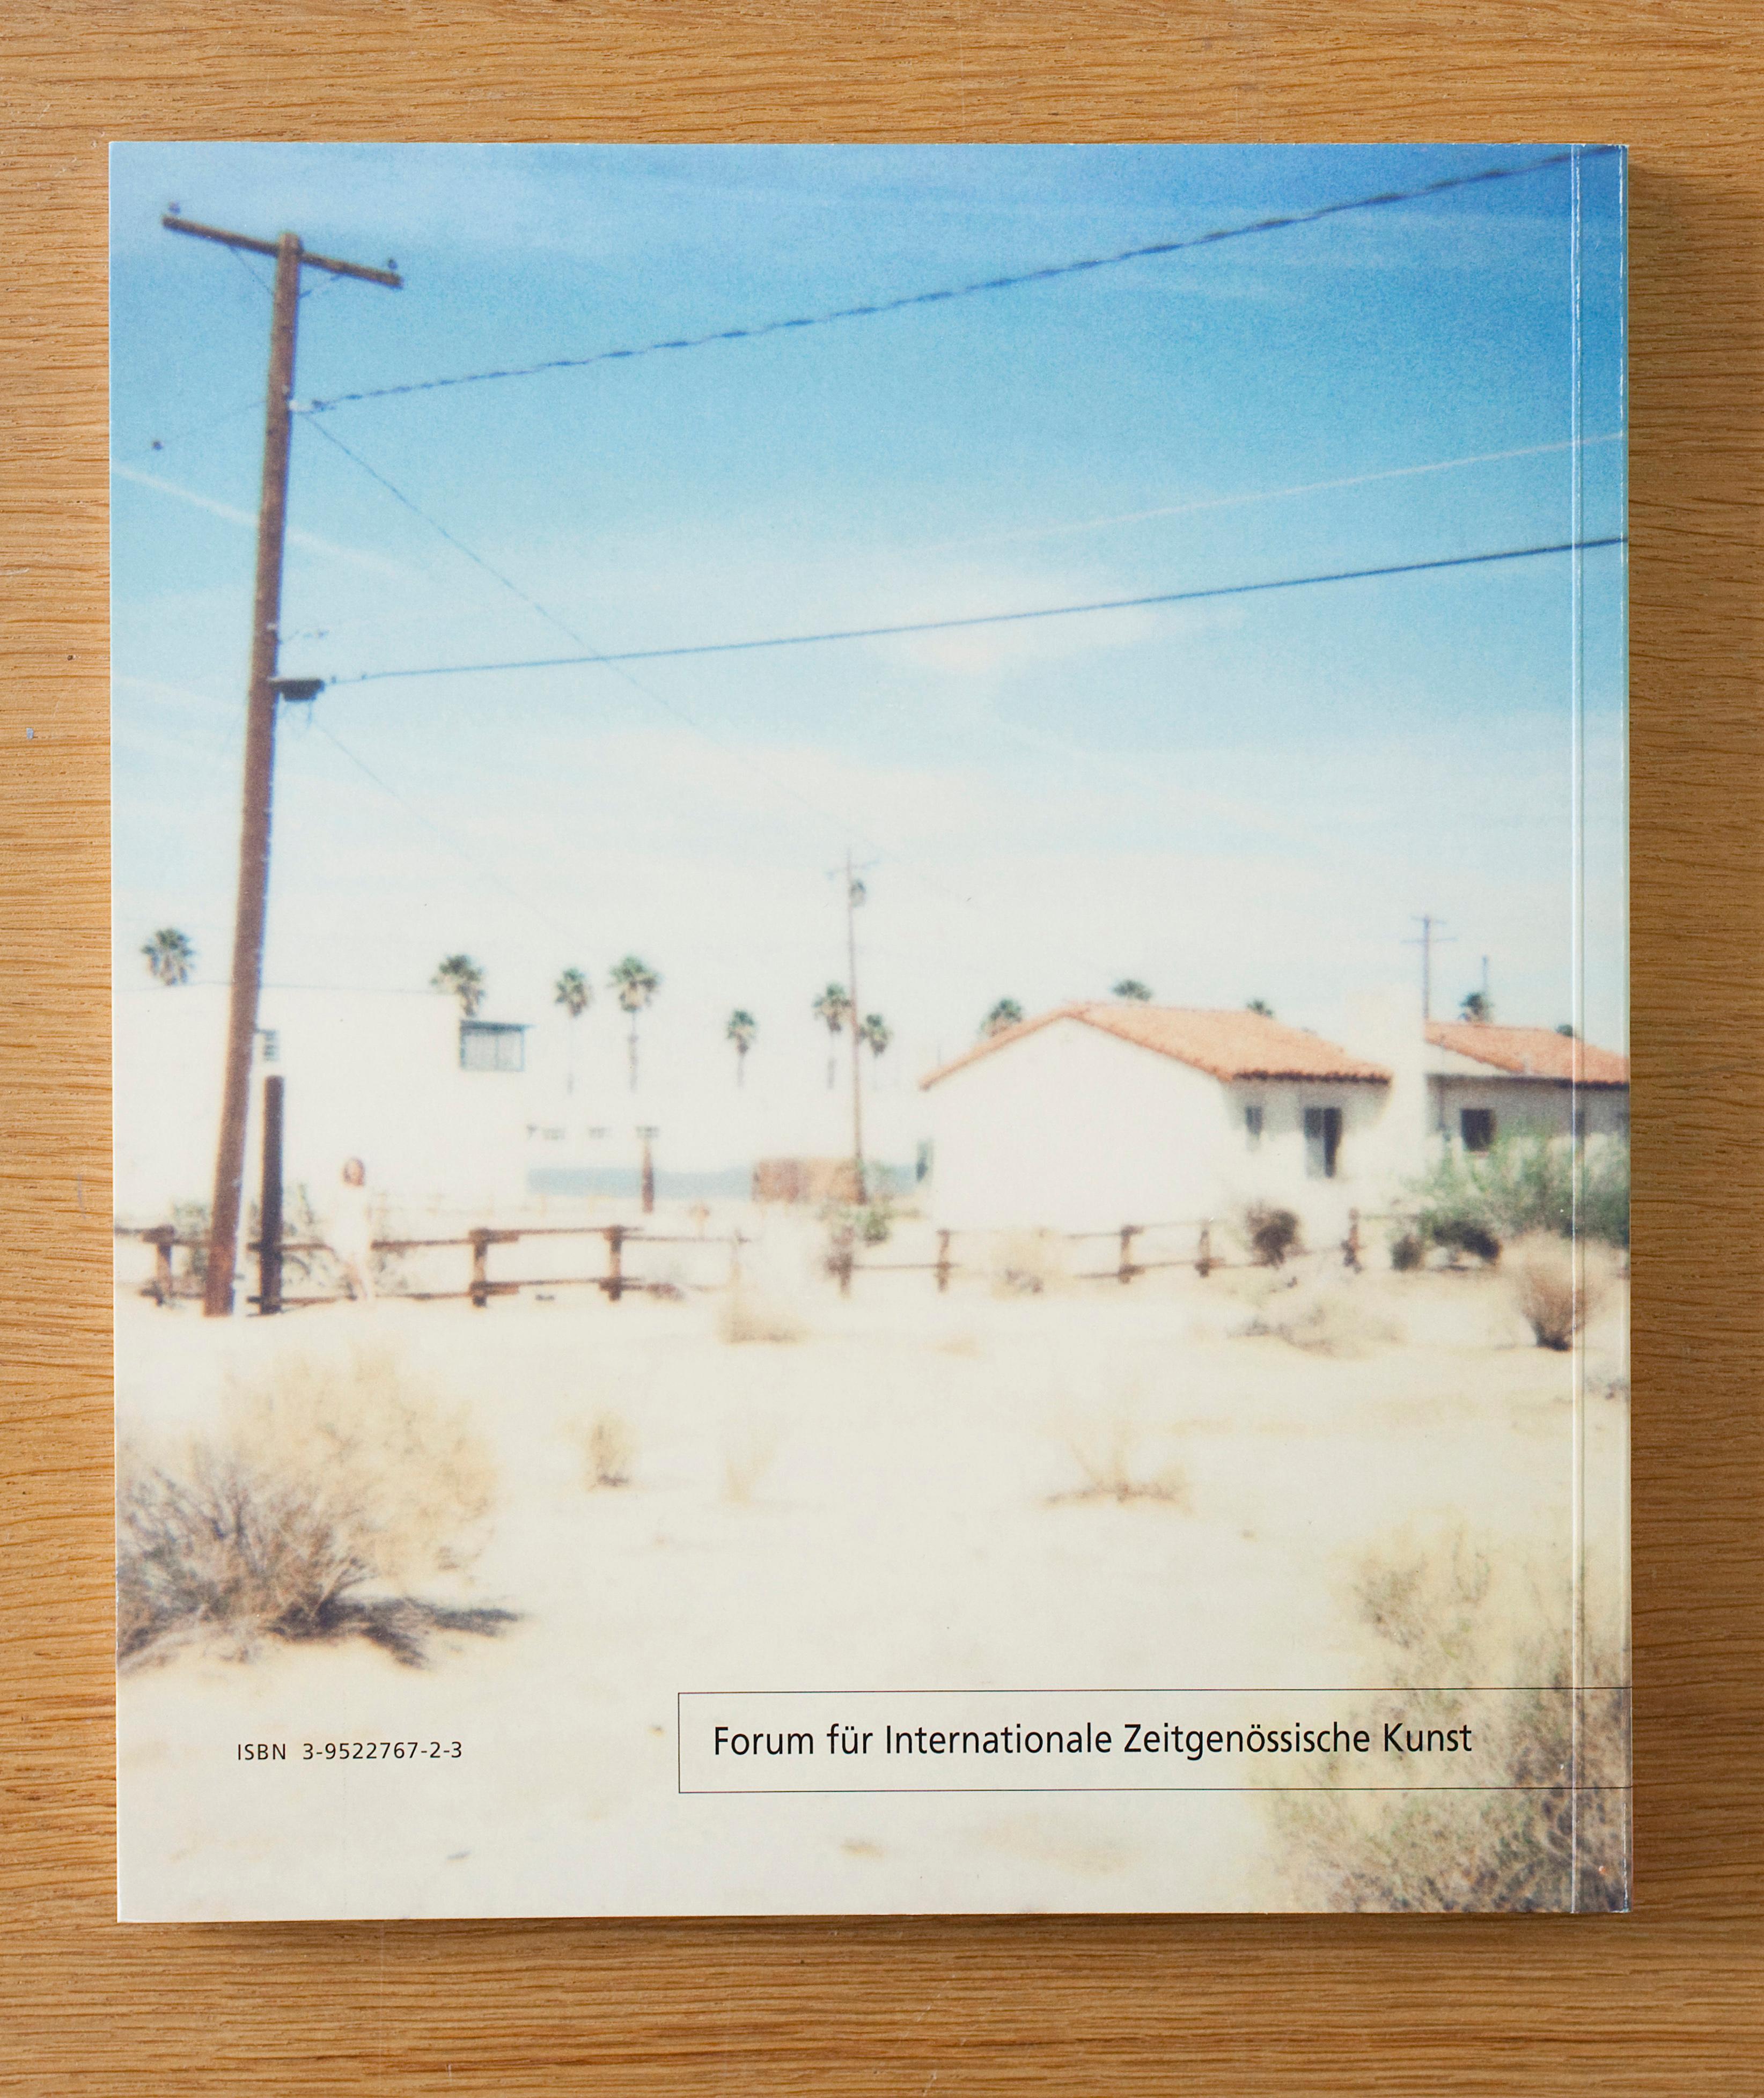 29 Palms, CA - Monograph - signed
Hardcover Edition, each page is a think cardboard page. 
Like an old fashioned children's book.
published by Galerie Kaempf, Basel, 2004
Edition 400
ISBN 3-9522757-2-3

This is Stefanie Schneider's first monograph